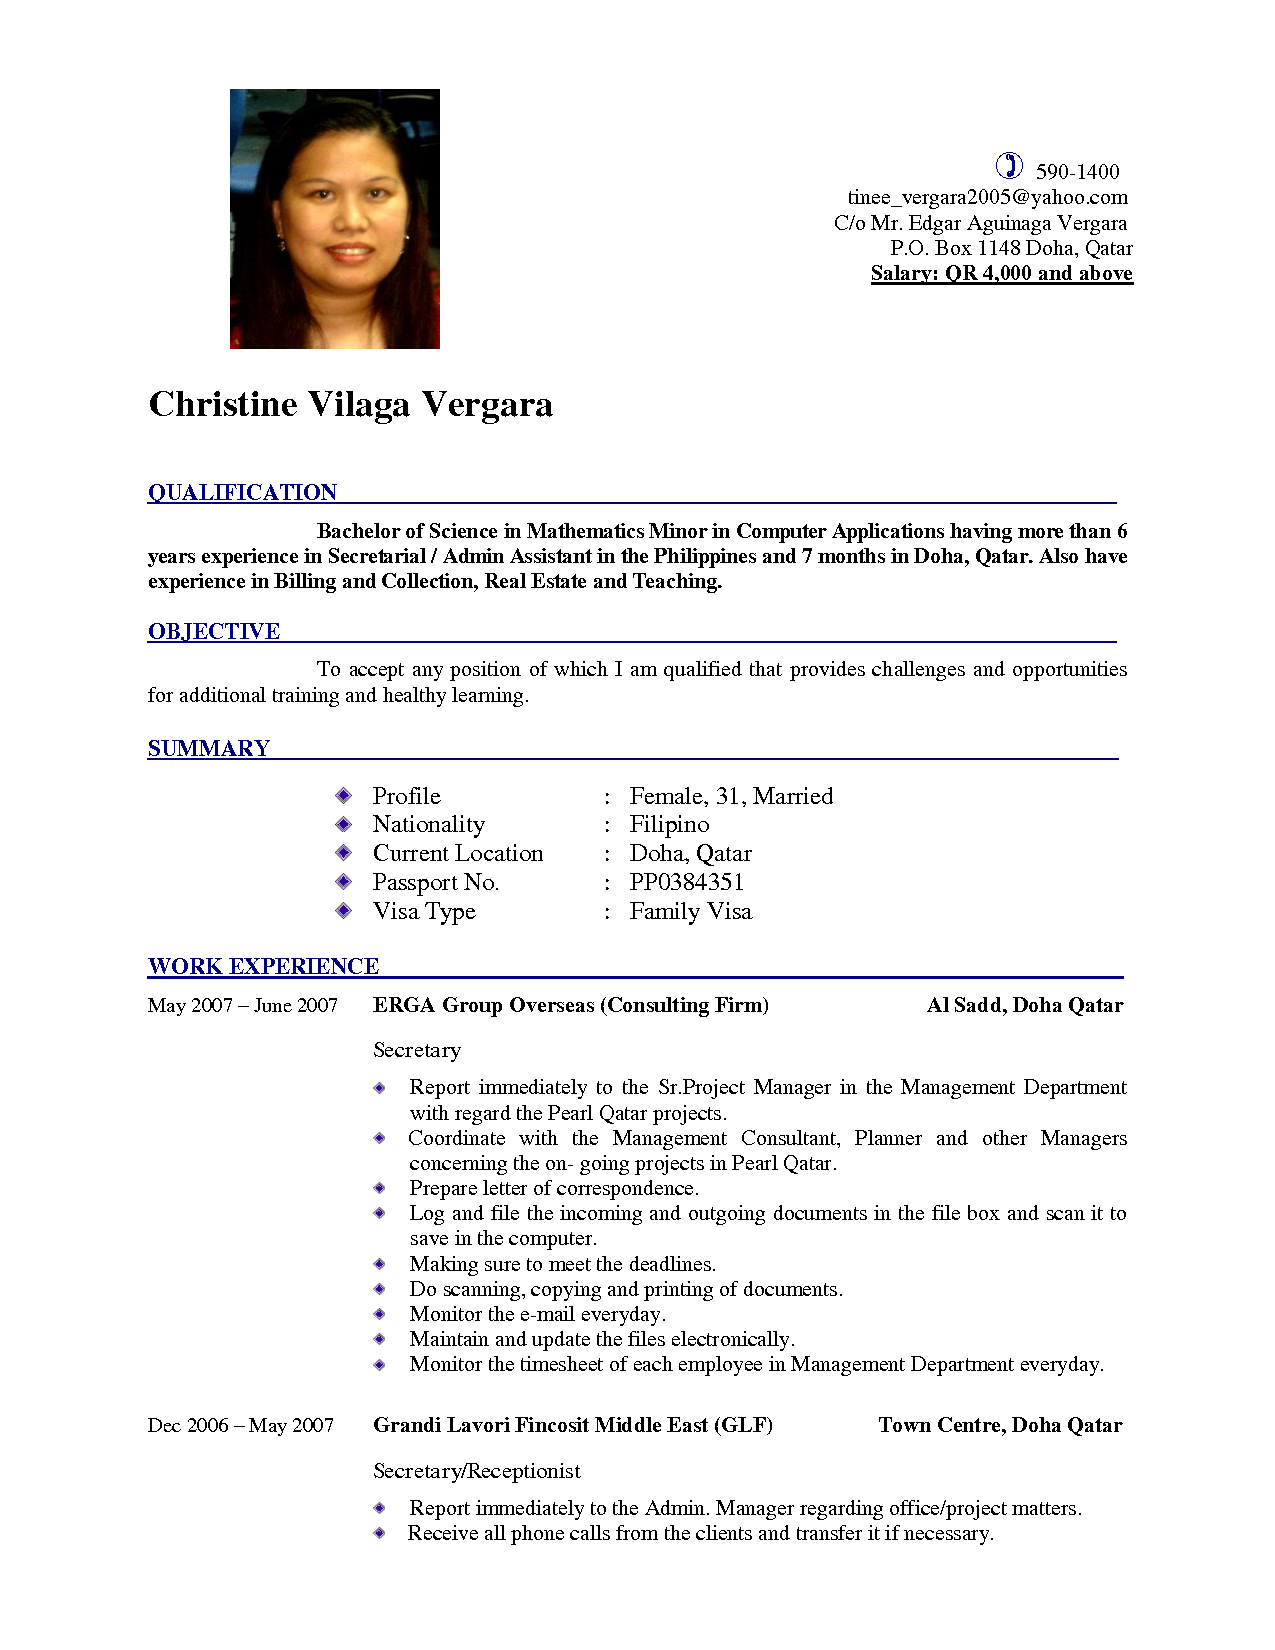 Latest Cv New Format With Salary Places To Visit Pinterest throughout size 1275 X 1650